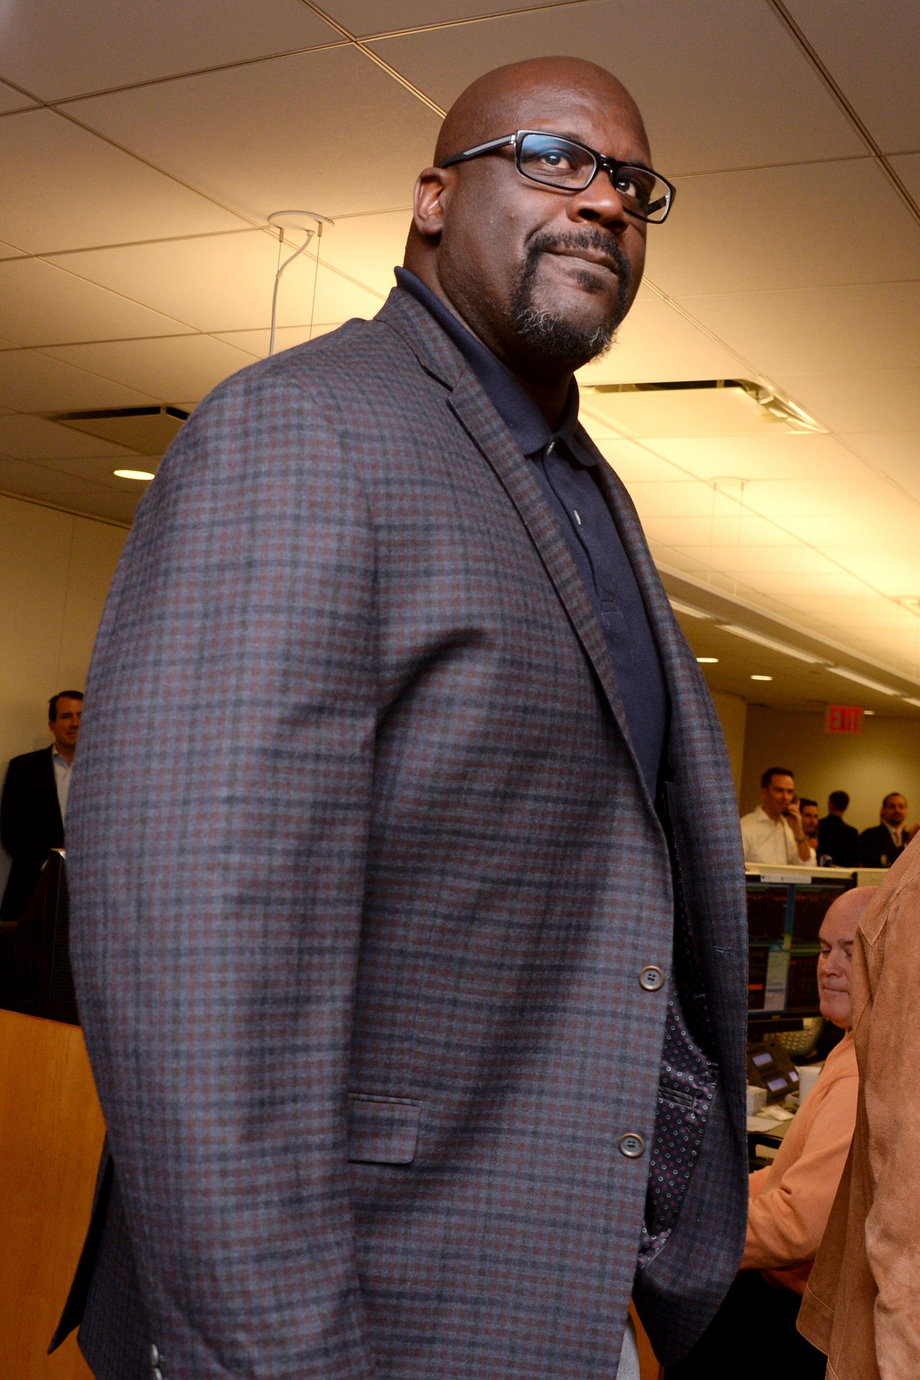 Basketball legend Shaquille O'Neal dropped by.